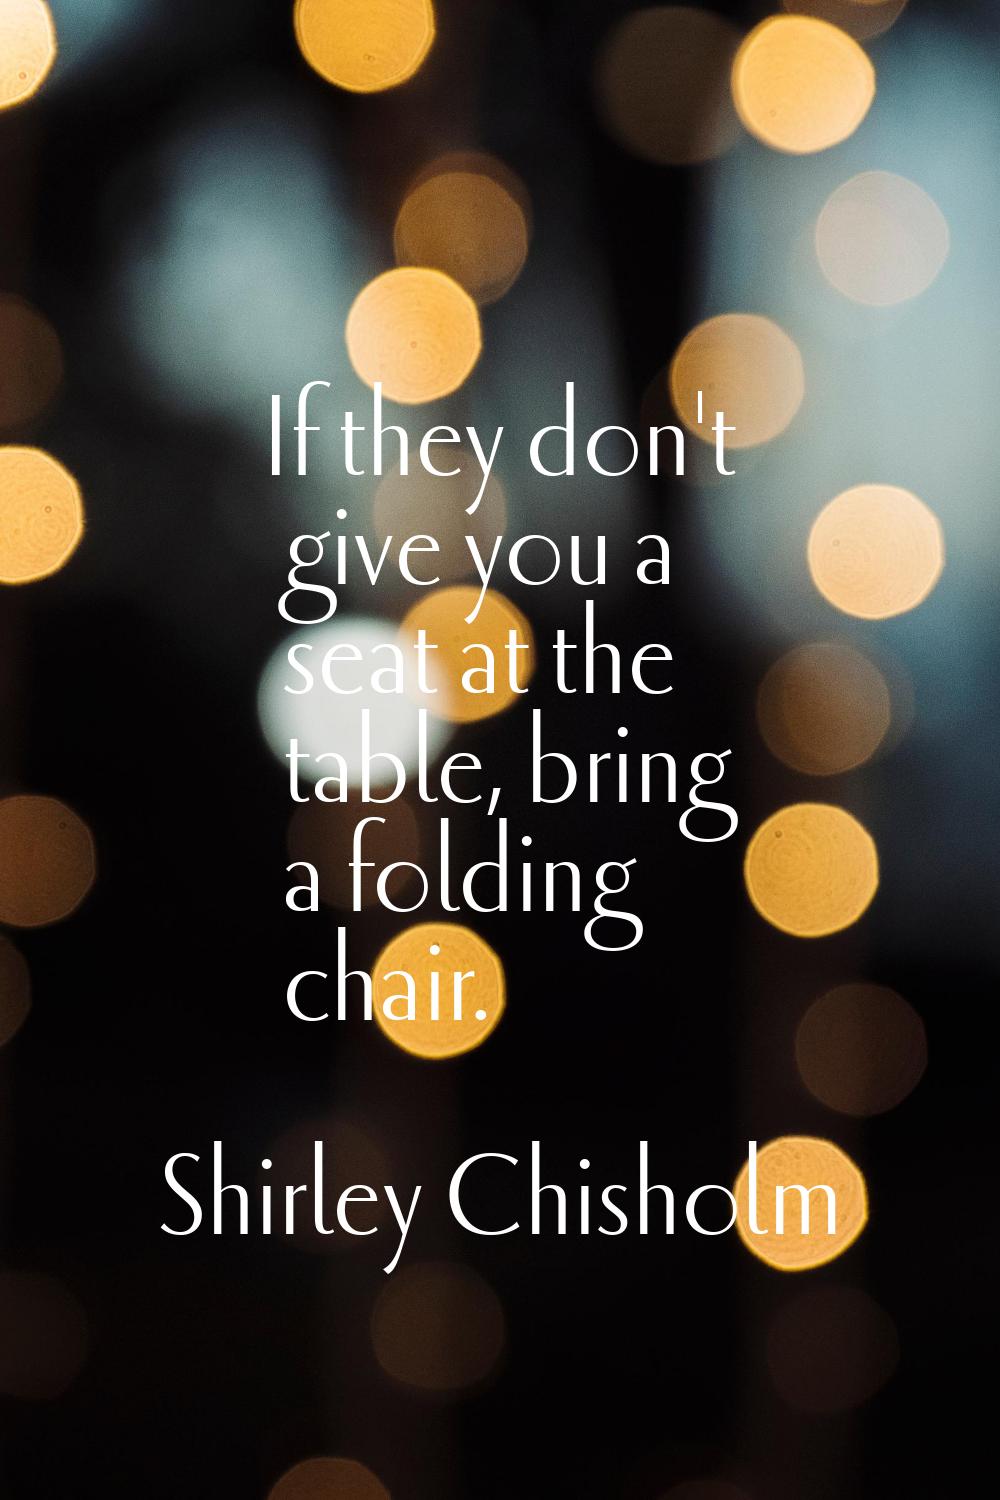 If they don't give you a seat at the table, bring a folding chair.